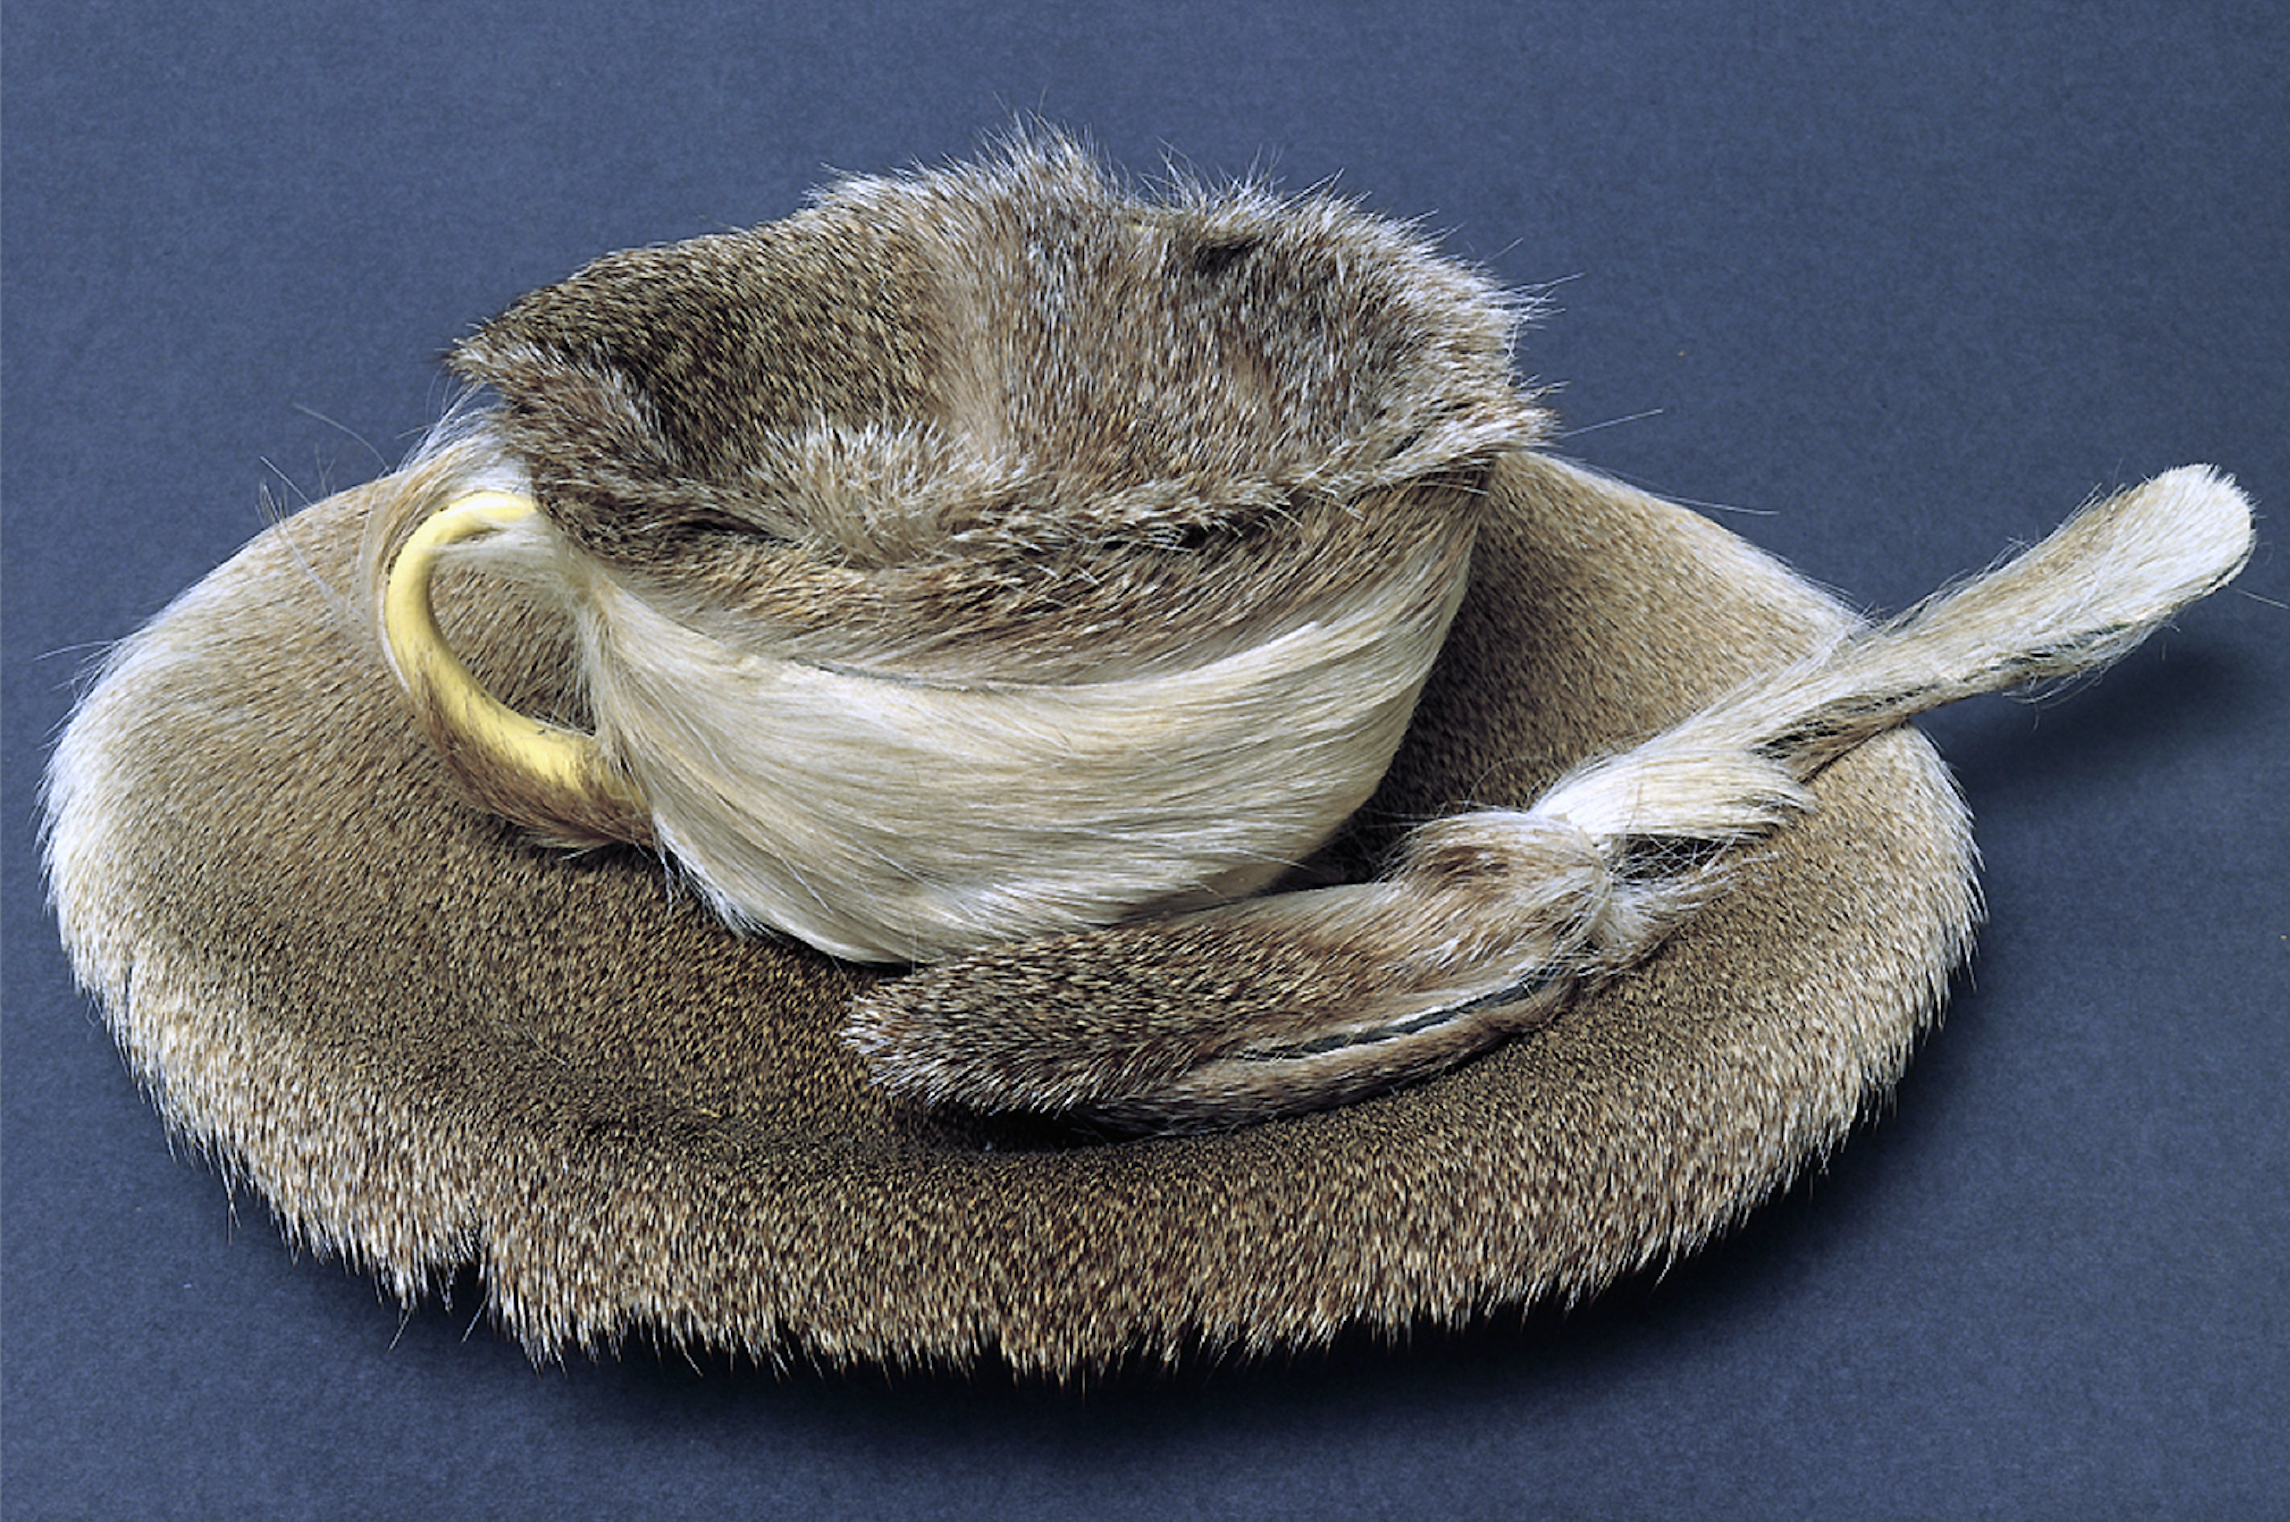 Meret Oppenheim. Object, 1936. Fur-covered cup, saucer, and spoon, cup 4-3/8 inches in diameter; saucer 9-3/8 inches in diameter; spoon 8 inches long, overall height 2-7/8" (The Museum of Modern Art)